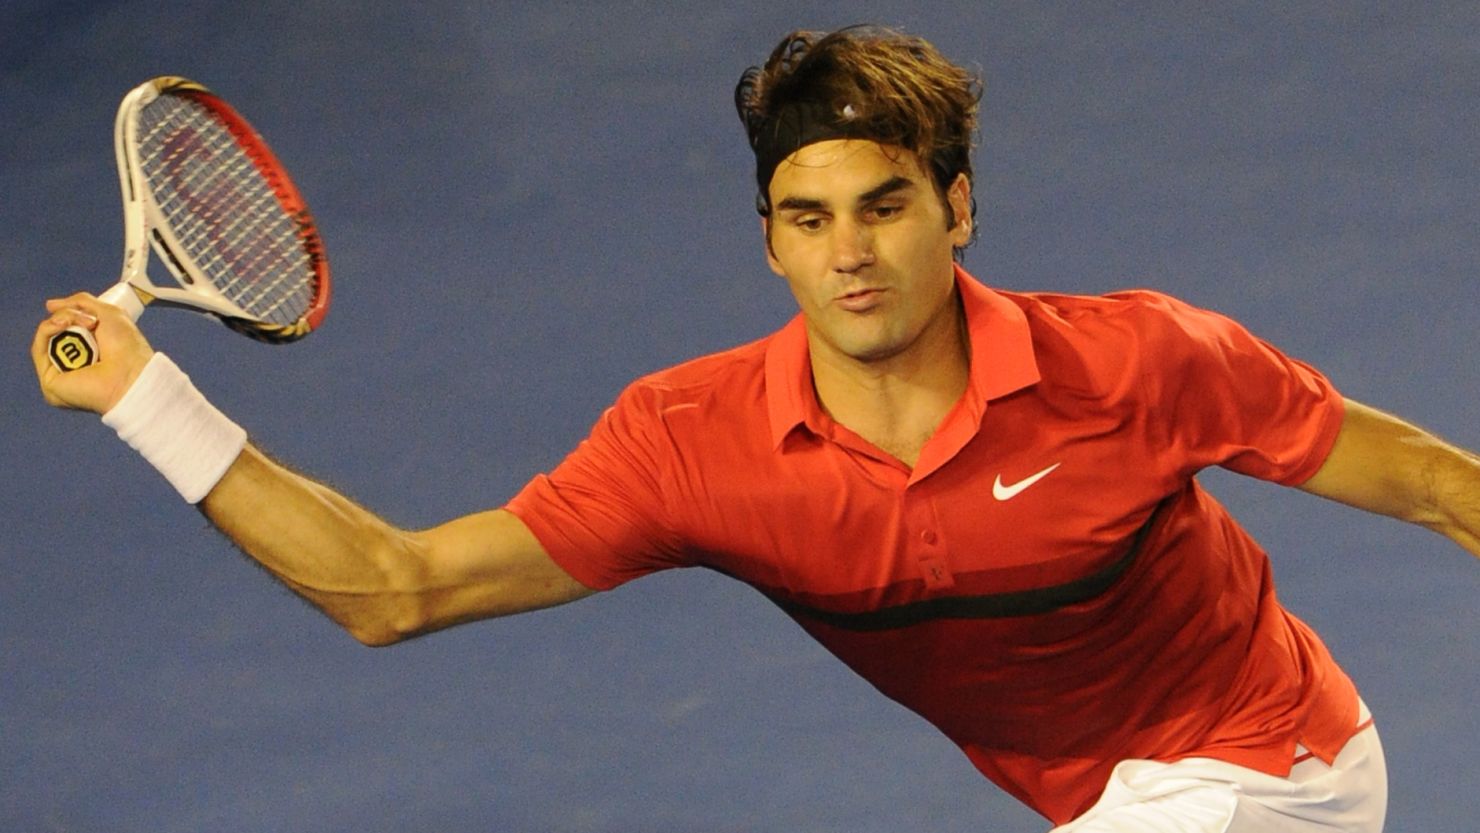 Roger Federer enjoyed a straight sets win over Nicolas Mahut at the ATP Tour 500 event in Rotterdam on Wednesday